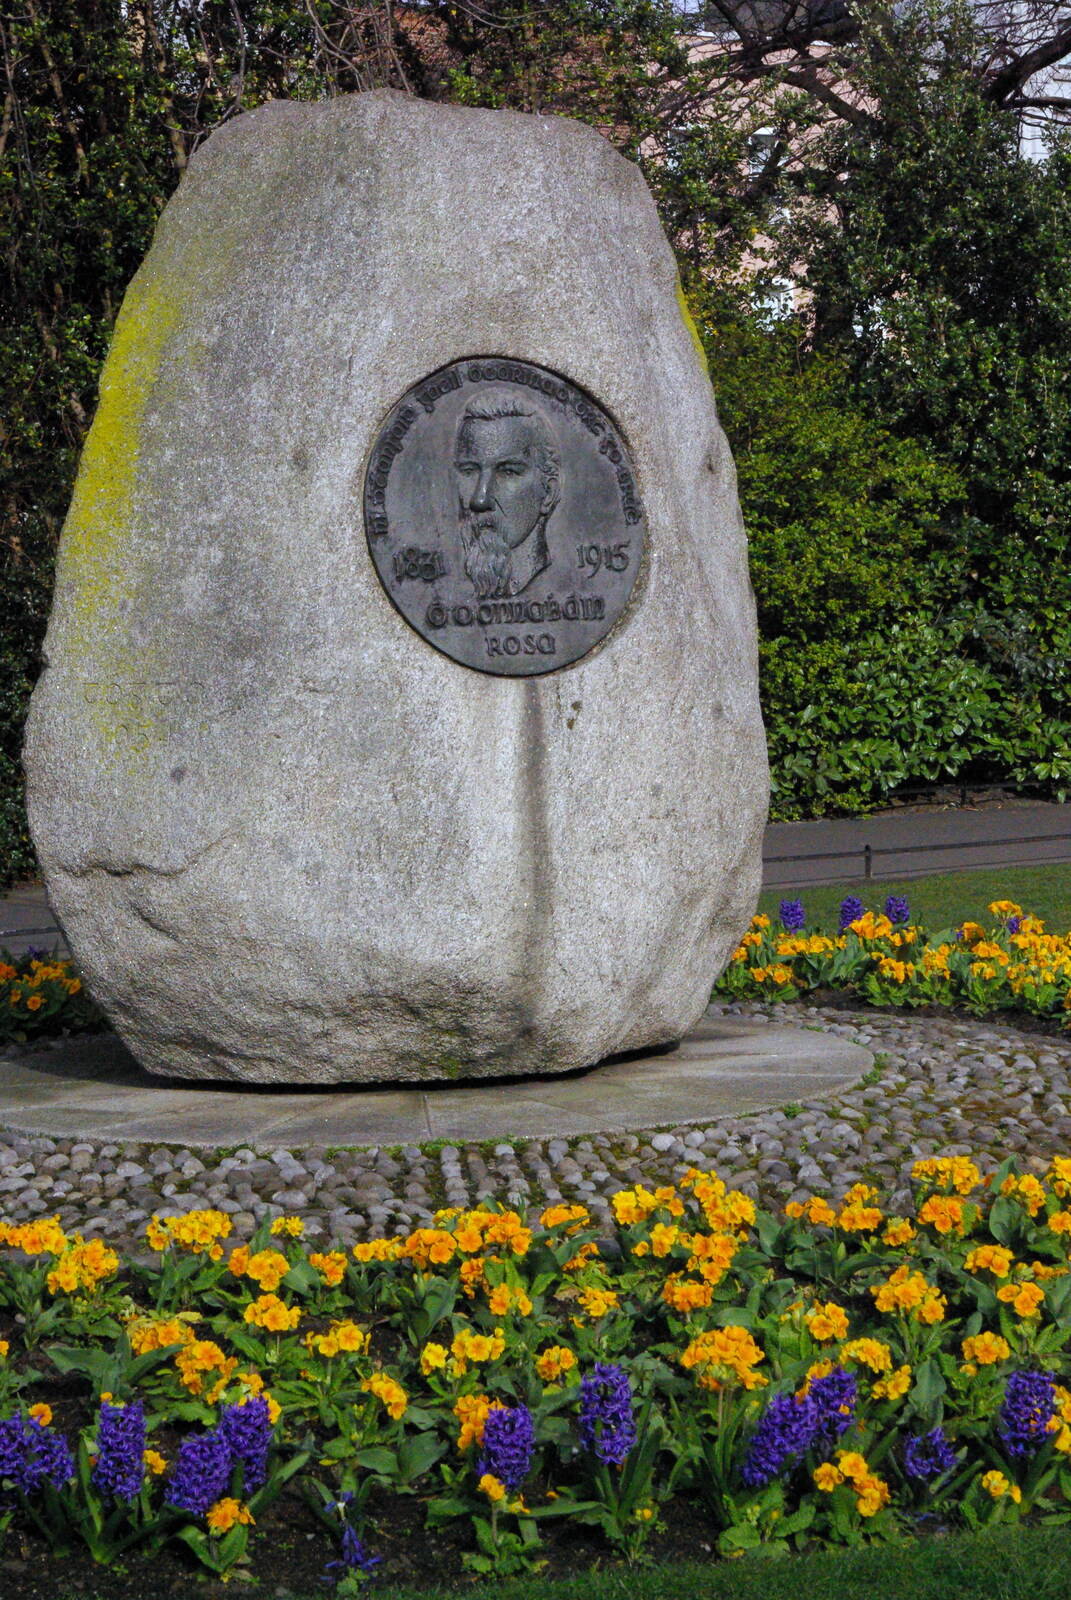 Easter in Dublin, Ireland - 21st March 2008: A rock memorial in the park